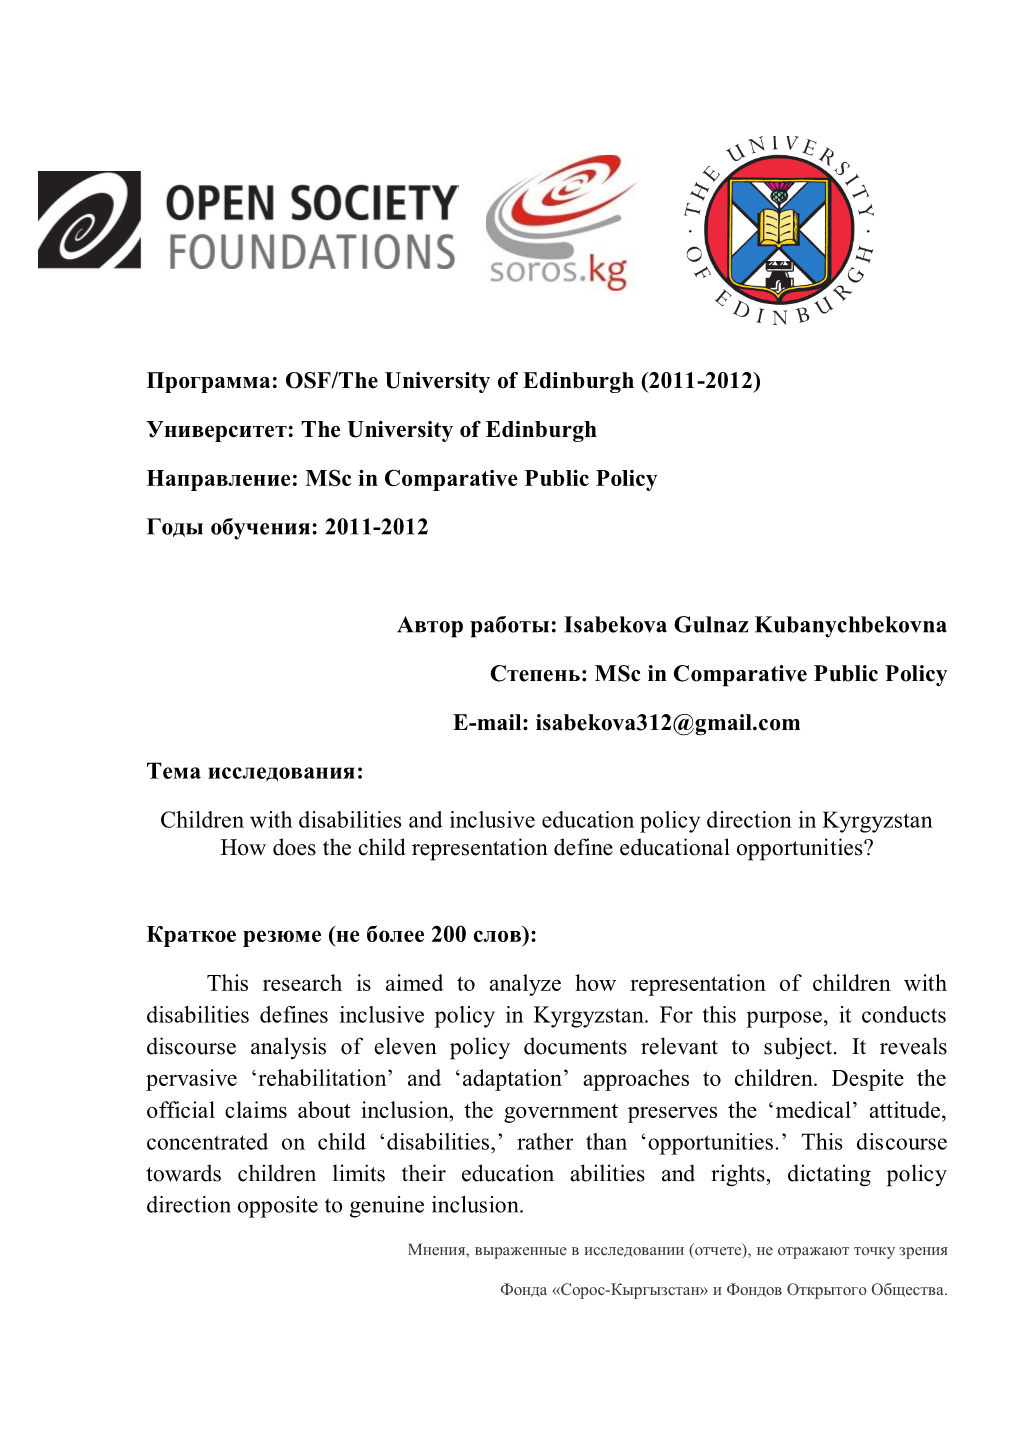 Children with Disabilities and Inclusive Education Policy Direction in Kyrgyzstan How Does the Child Representation Define Educational Opportunities?